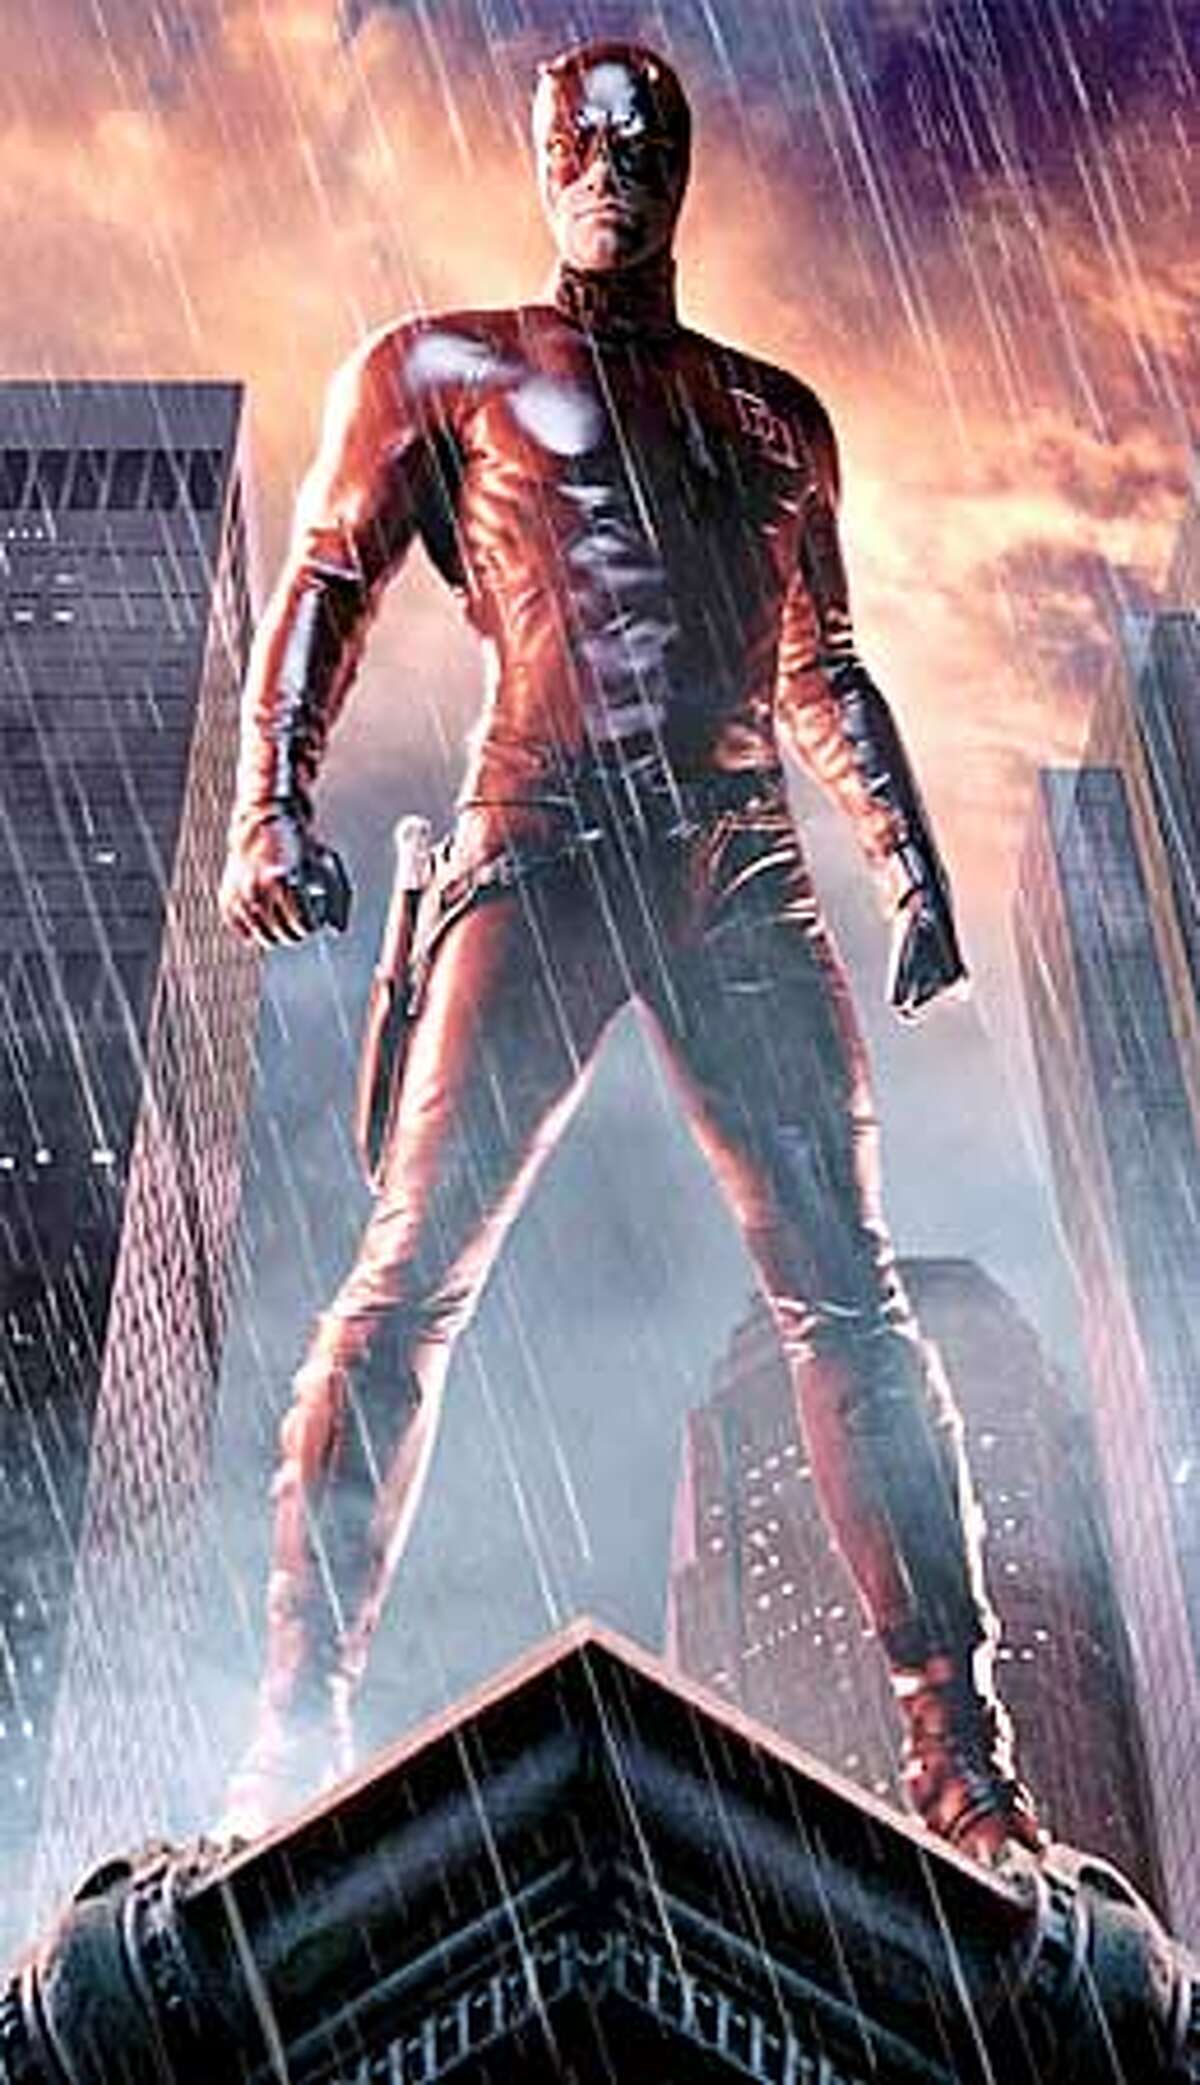 Ben Affleck wears a two-piece leather cat suit in "Daredevil," rather than the red unitard of the comic book character